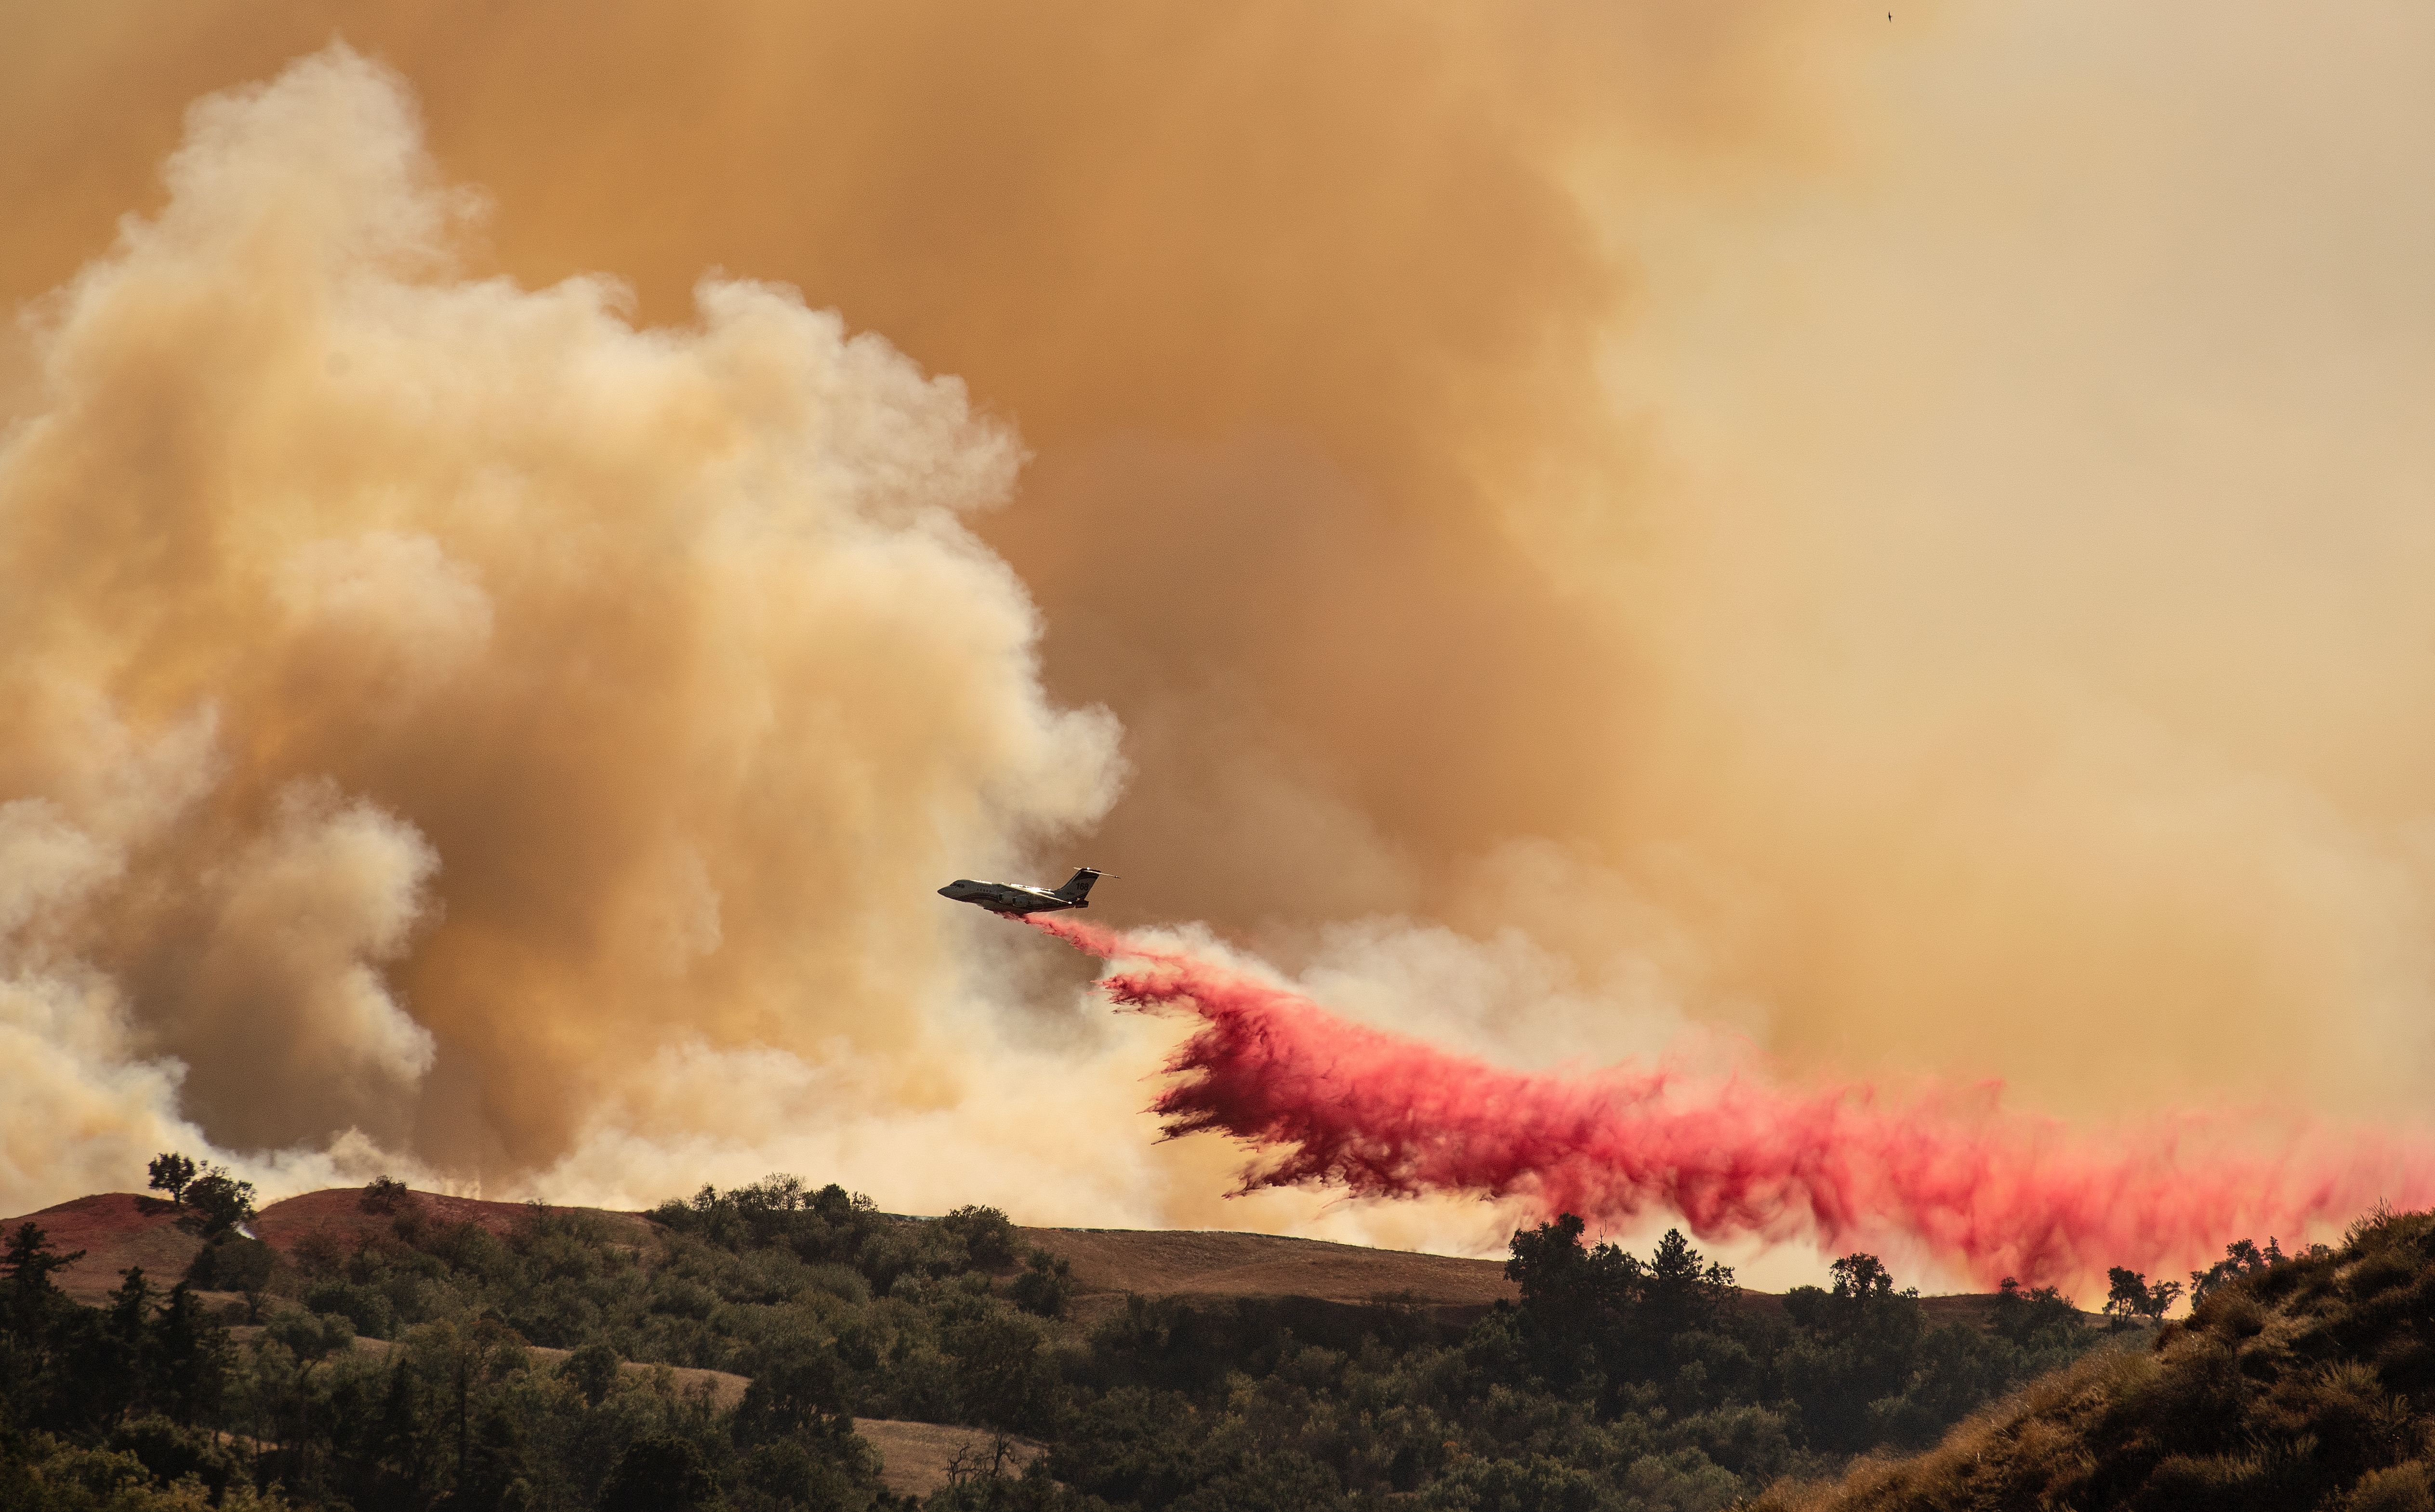 An aircraft helps fight the Saddleridge Fire by dropping fire retardant along a ridge in Newhall, California on Oct. 11, 2019. 